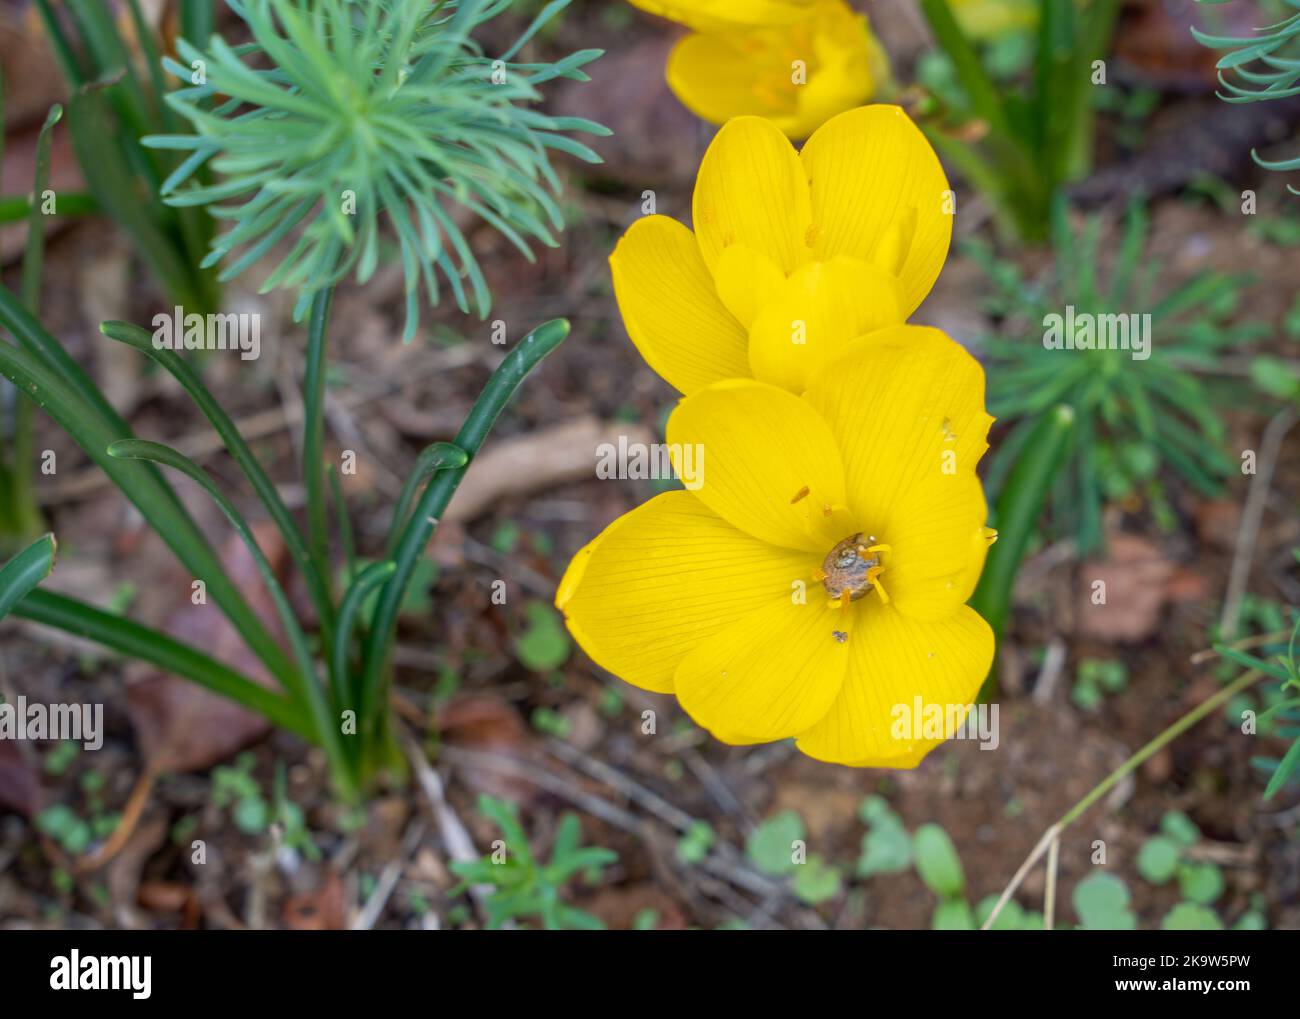 close-up of bright yellow autumn bloom Sternbergia lutea daffodil with a snail in the middle of the flower Stock Photo